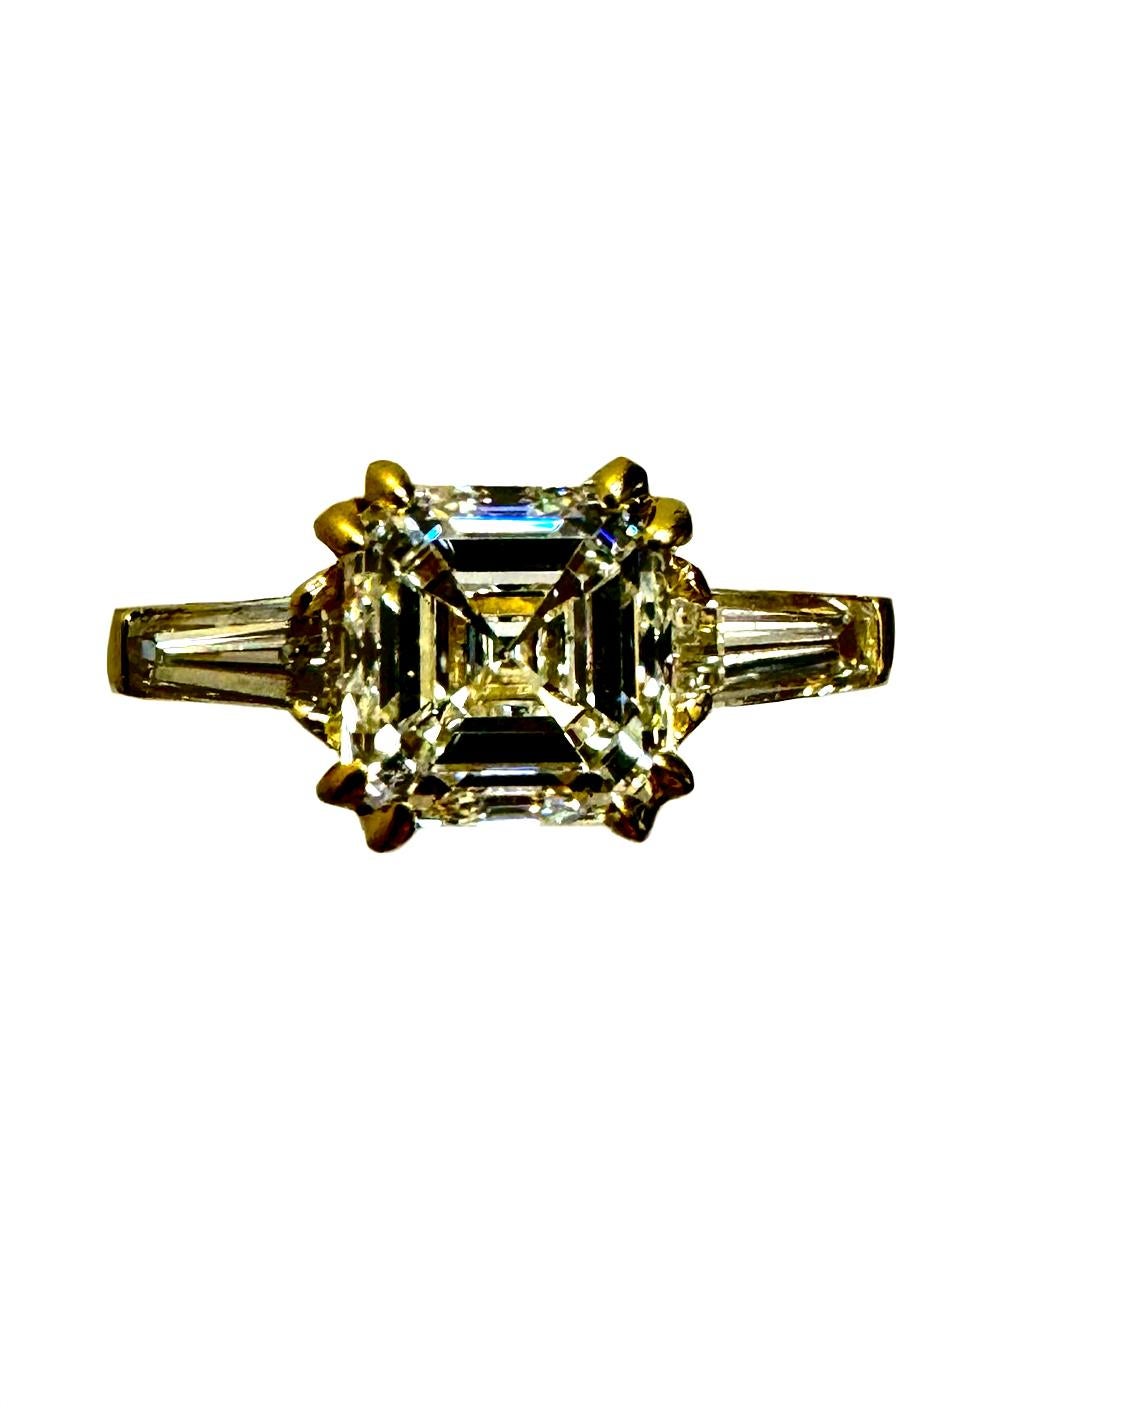 DeKara Design Collection

Metal- 18K Yellow Gold, .750.  90% Platinum 10% Iridium.

Size- 6 3/4.  FREE SIZING!!!!

Stones-GIA Certified Asscher Cut Diamond J Color SI1 Clarity, Two Tapered Baguette Diamonds I-J Color VS2-SI1 Clarity 0.76